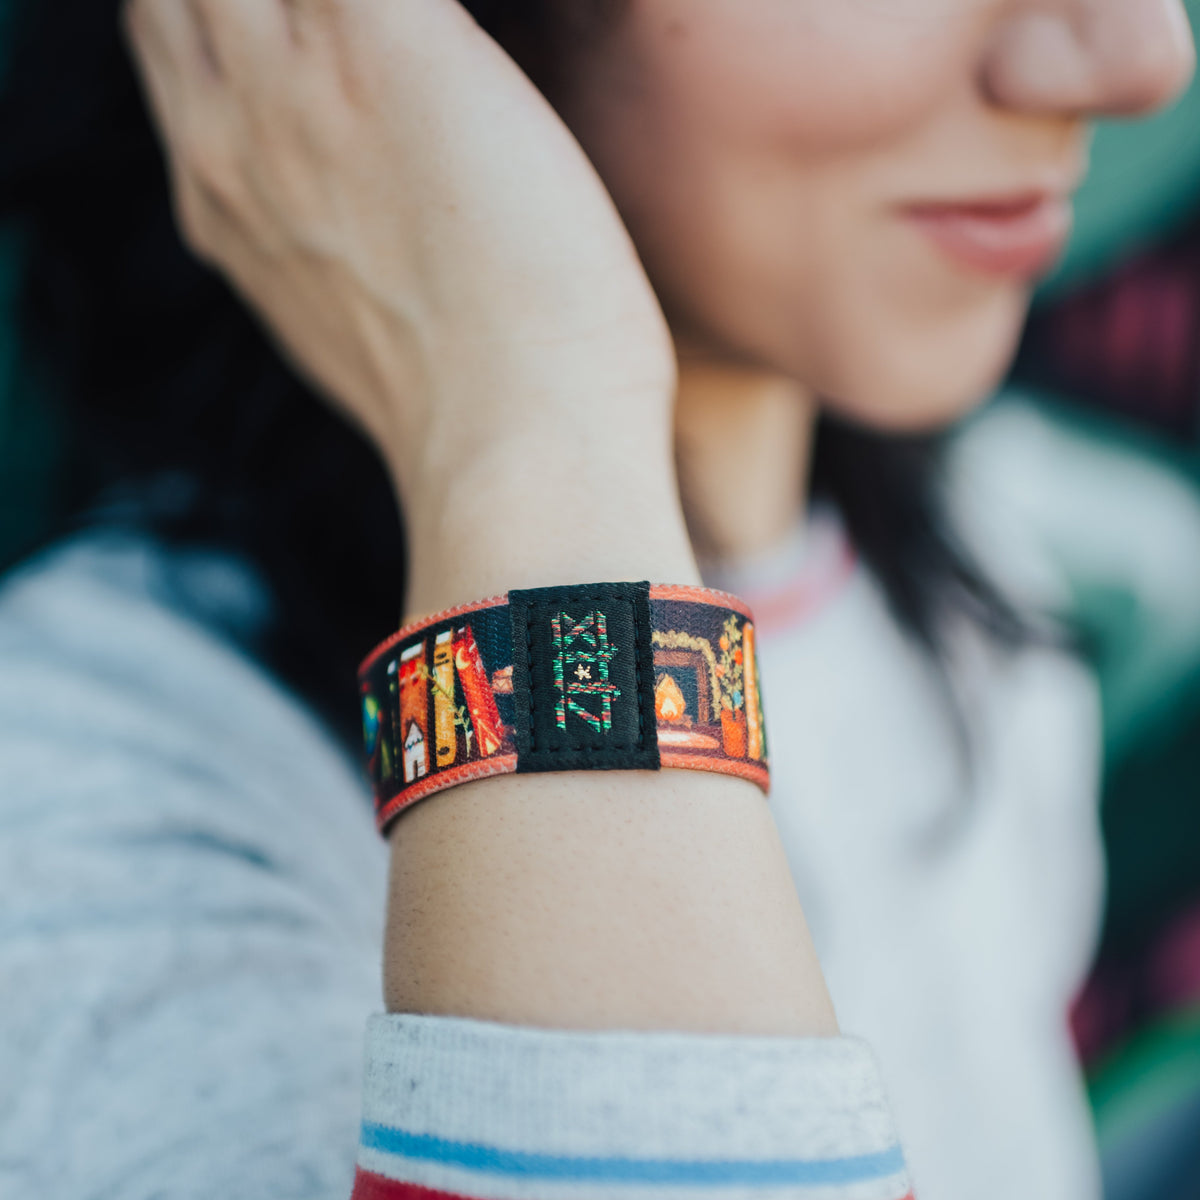 In Our Hearts-Sold Out-ZOX - This item is sold out and will not be restocked.